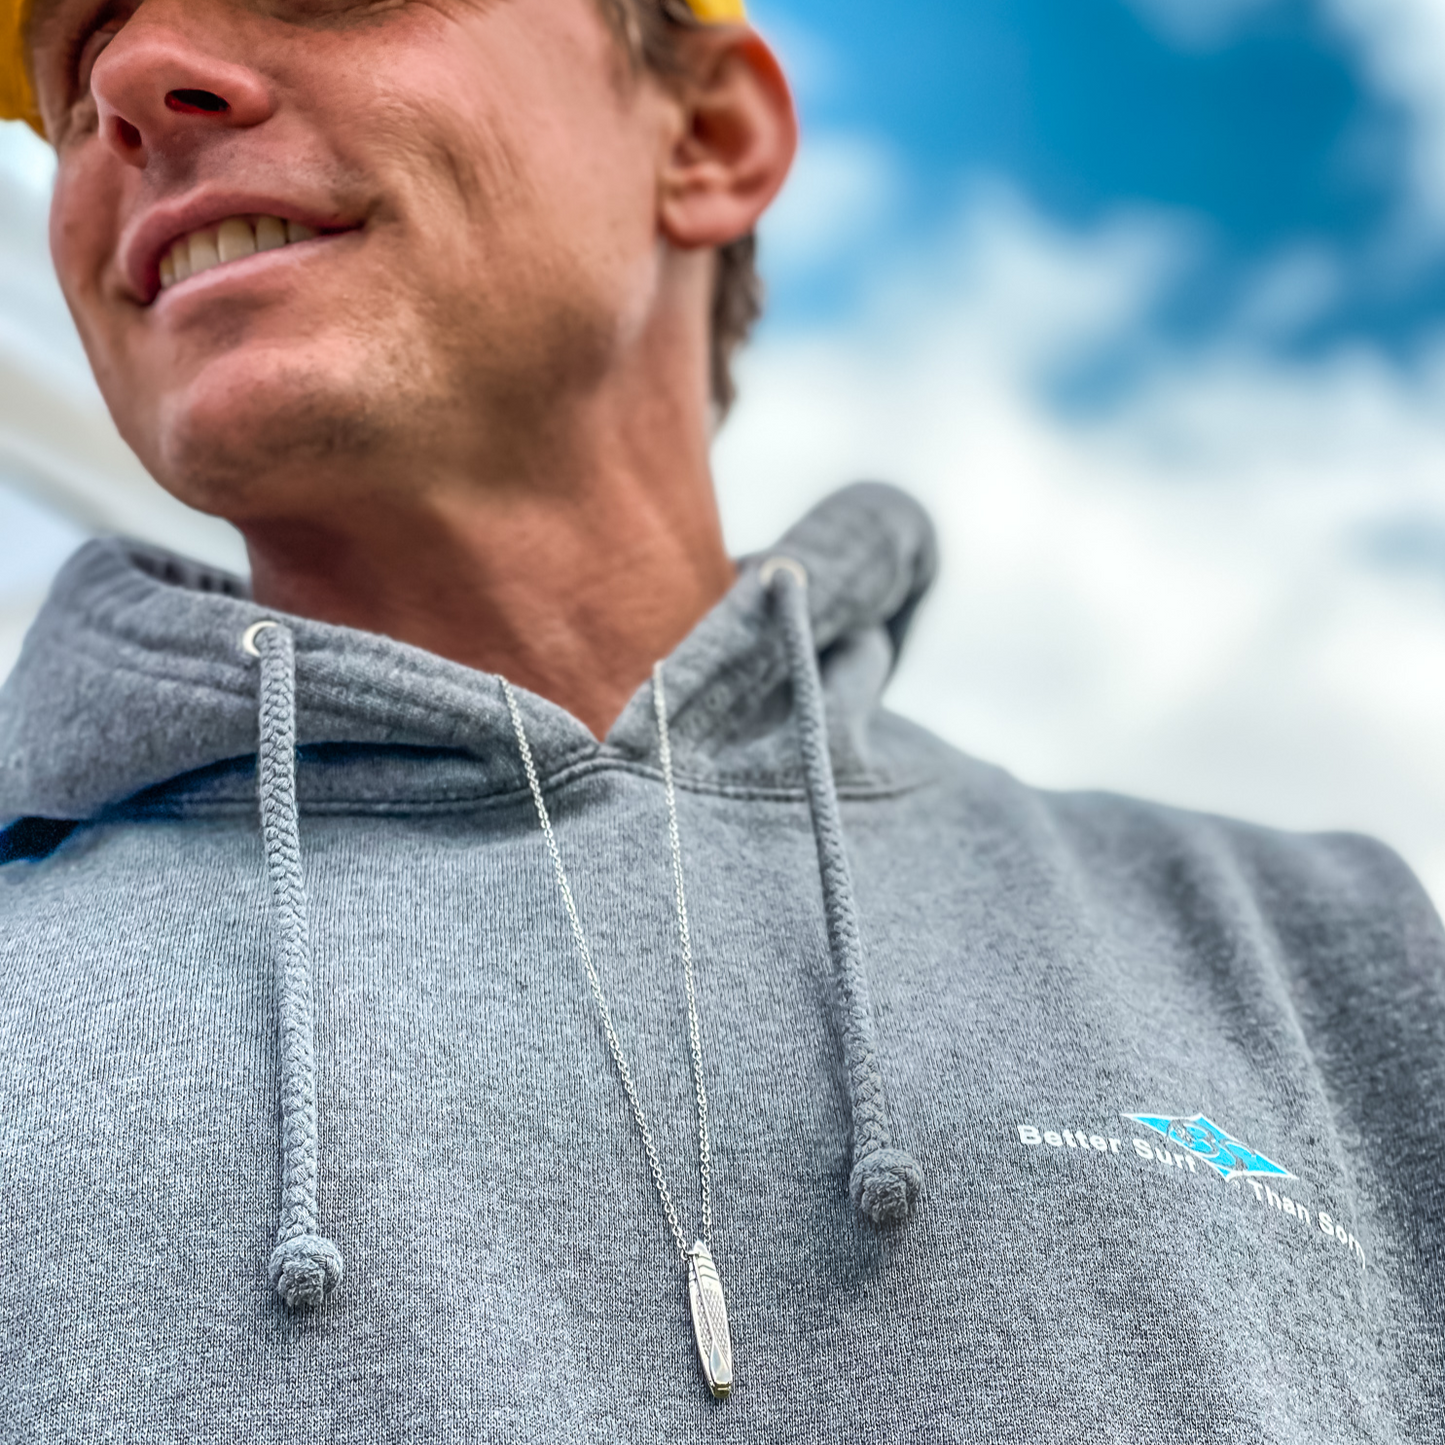 Jewelry for stand up paddlers. Looking for places to buy or rent a paddle board? This stand up paddle board pendant will be the best and highest performance SUP you'll ever find. Take your paddle board with you, even when you're not surfing, racing or touring. Shop SUP jewelry online or at a surf shop near you.